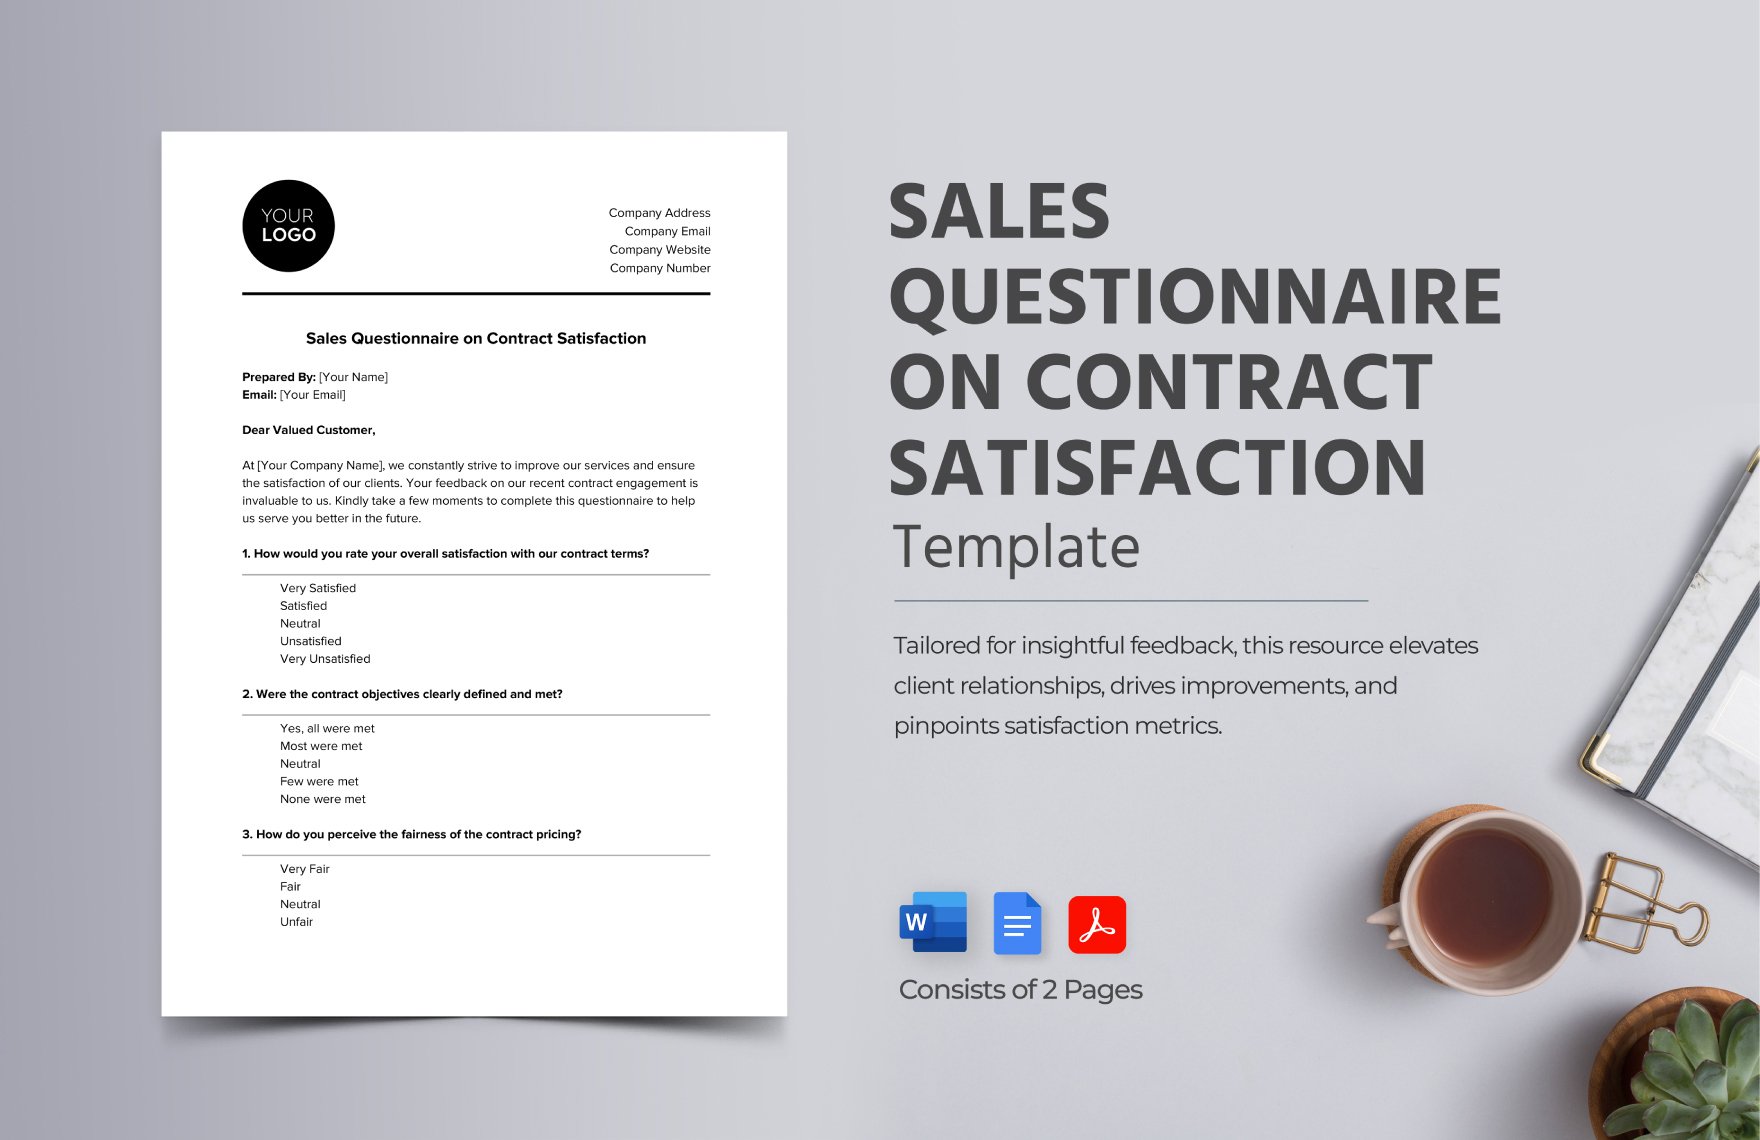 Sales Questionnaire on Contract Satisfaction Template